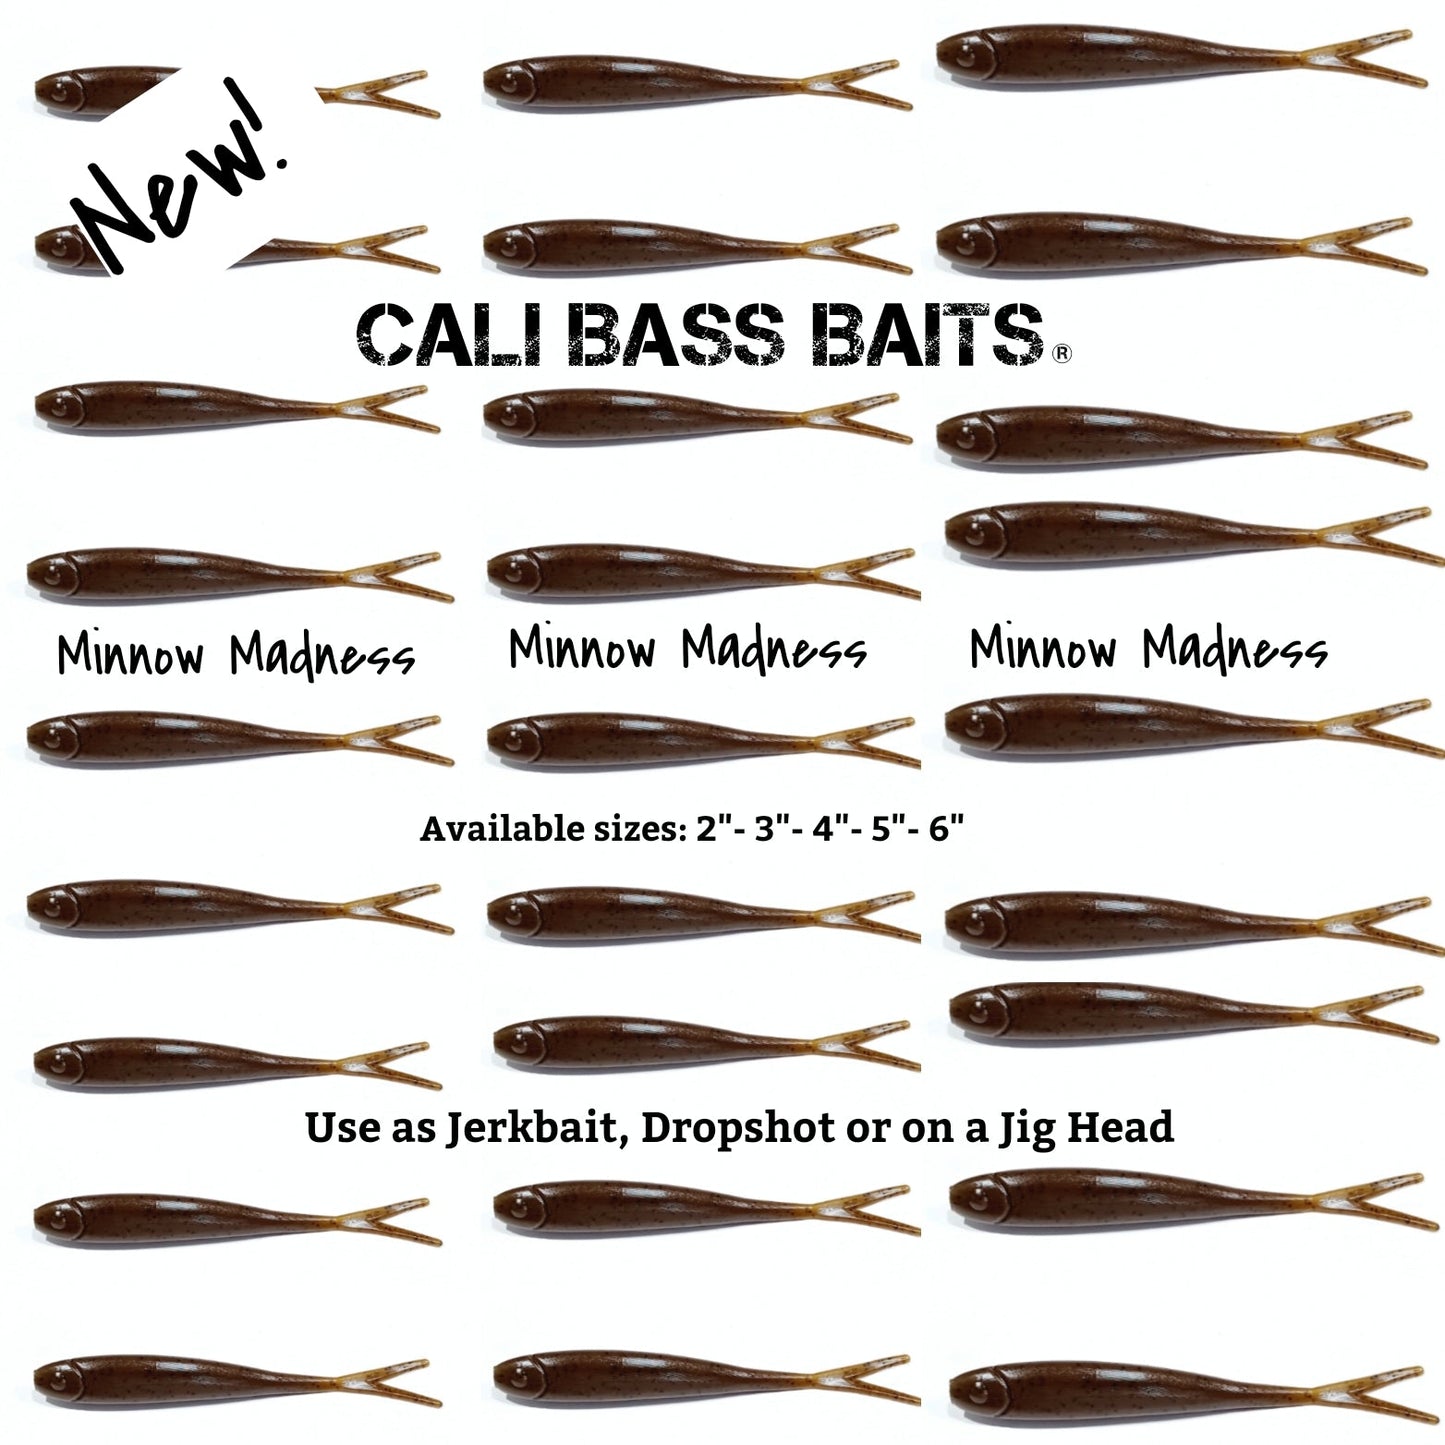 New! Minnow Madness (SIZE 5" inch bait) Great for Dropshot, Jerkbait and Swimbait set ups